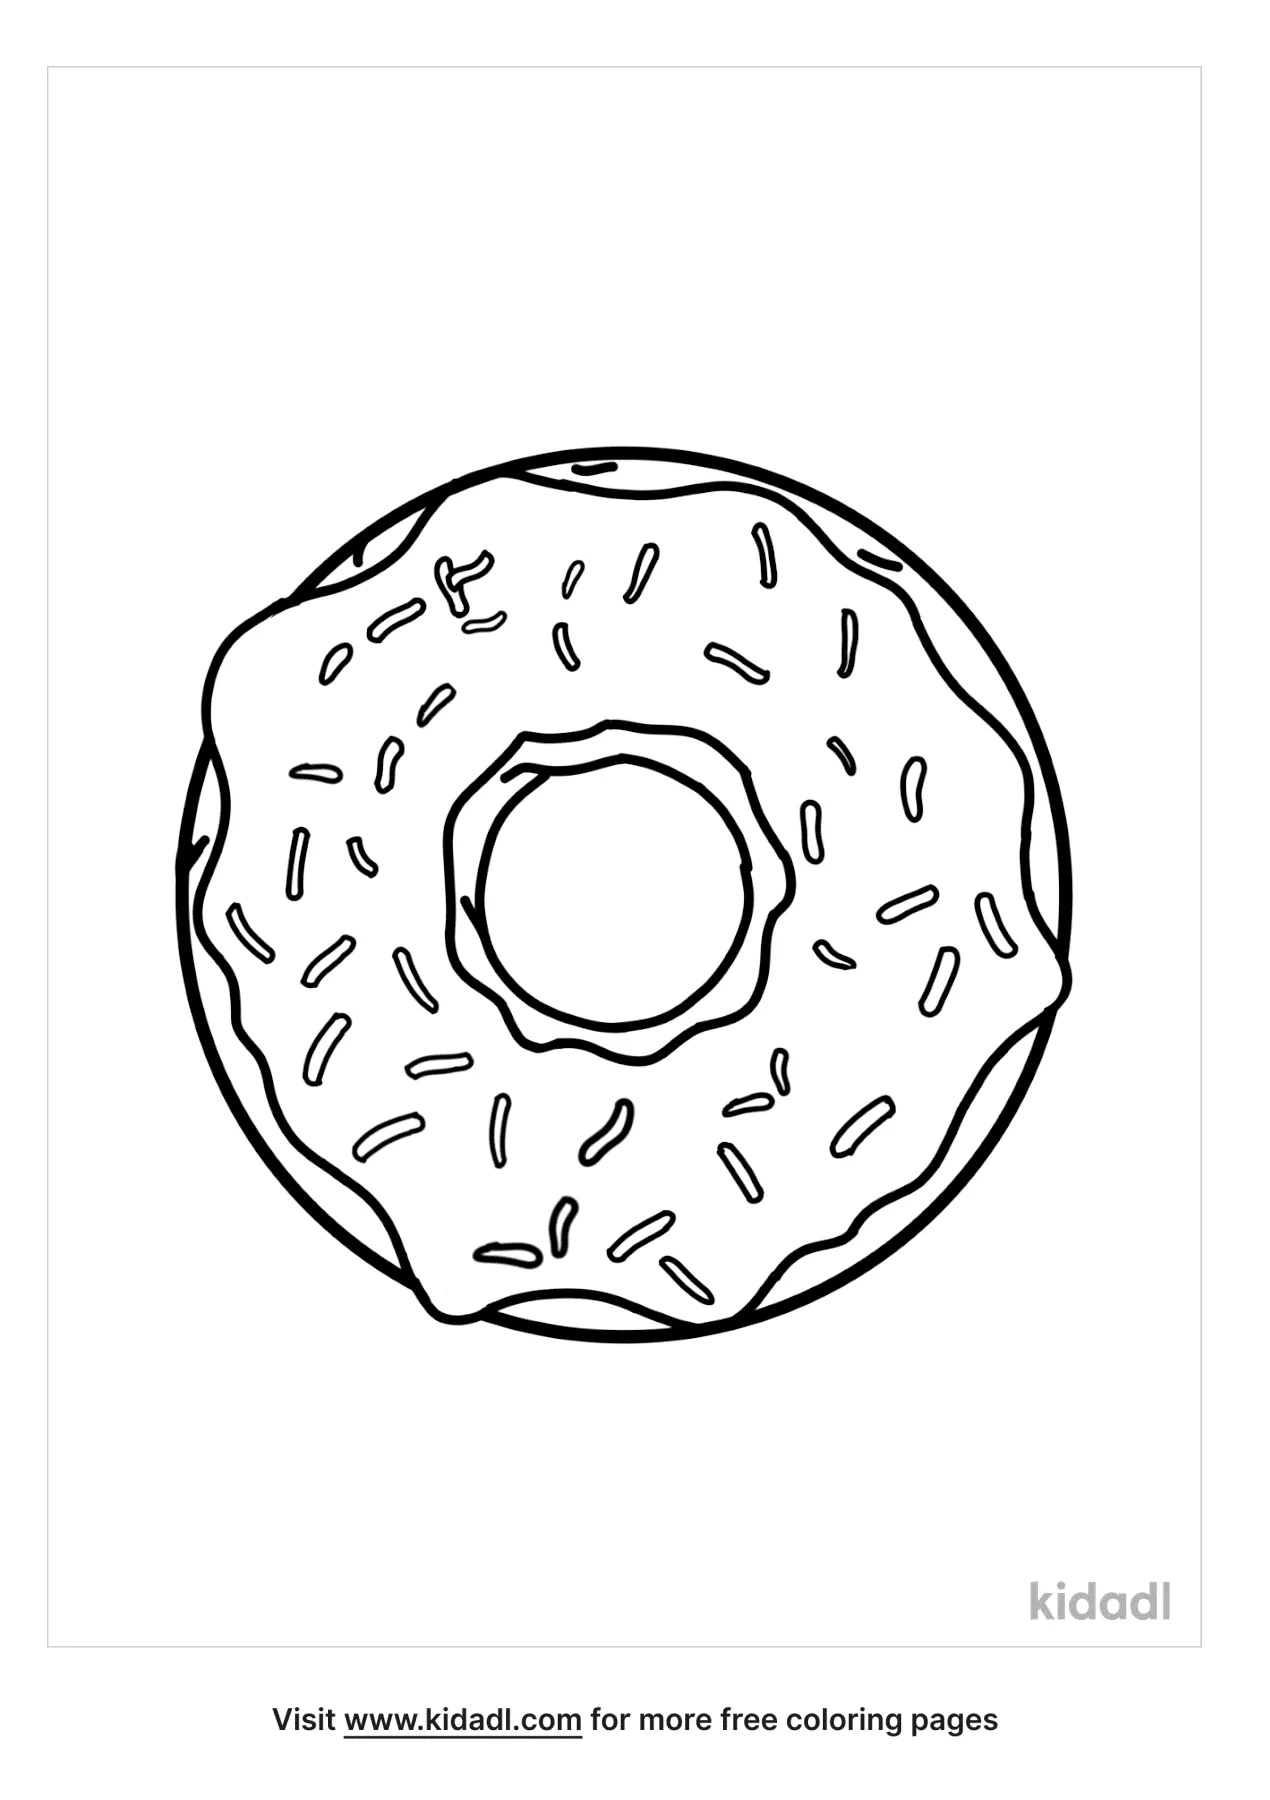 Sweets Coloring Pages Free Food Coloring Pages Kidadl